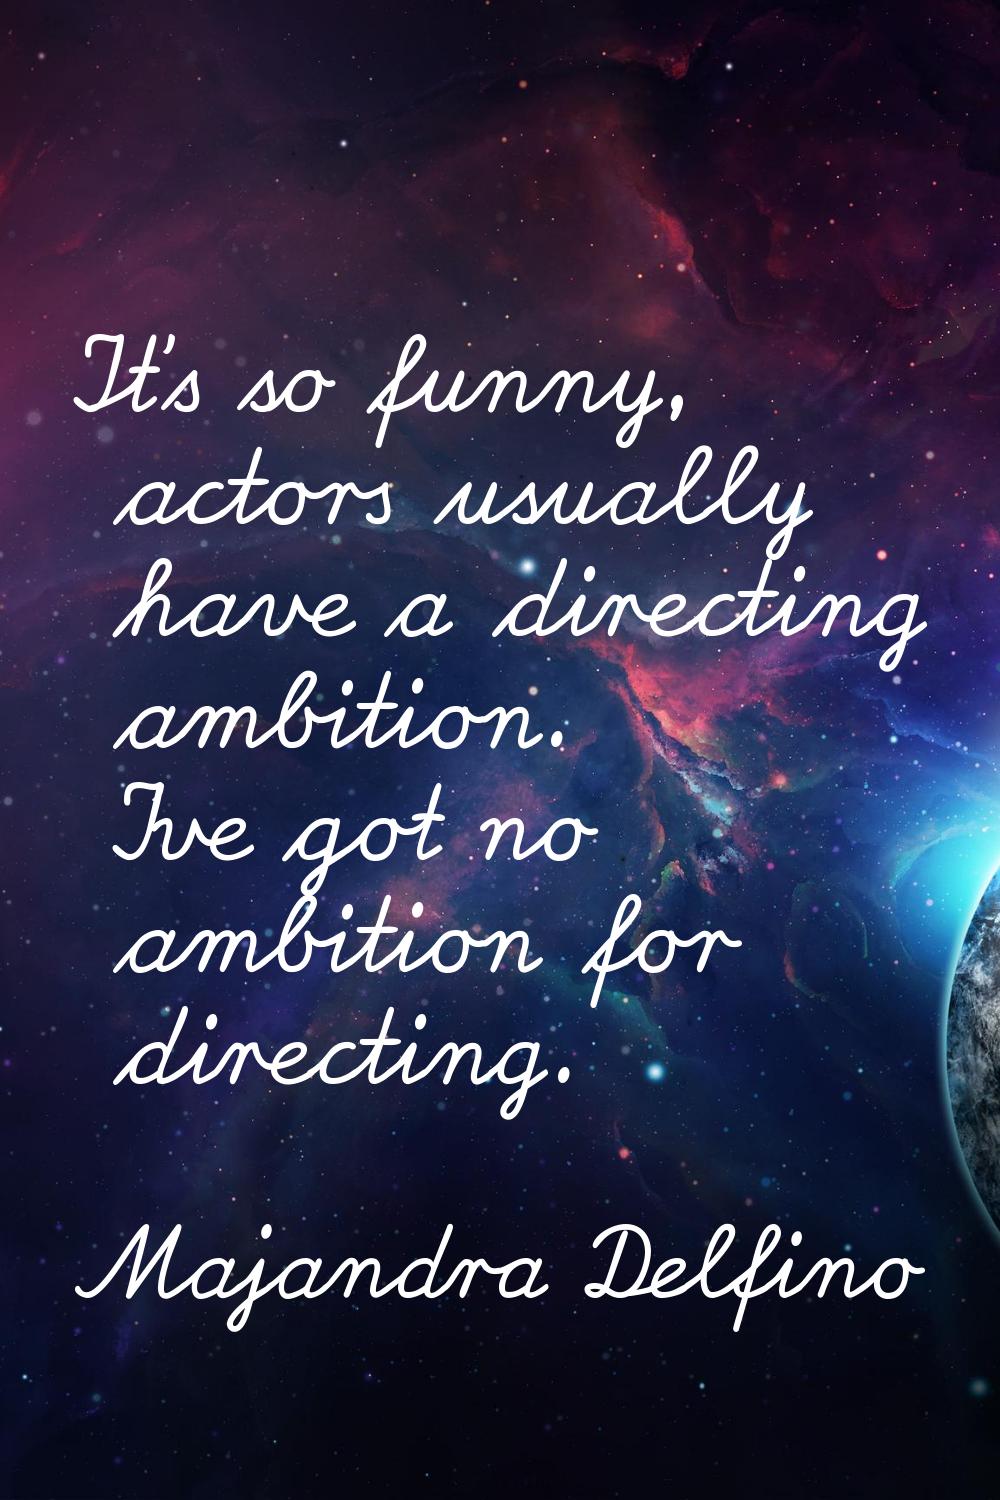 It's so funny, actors usually have a directing ambition. I've got no ambition for directing.